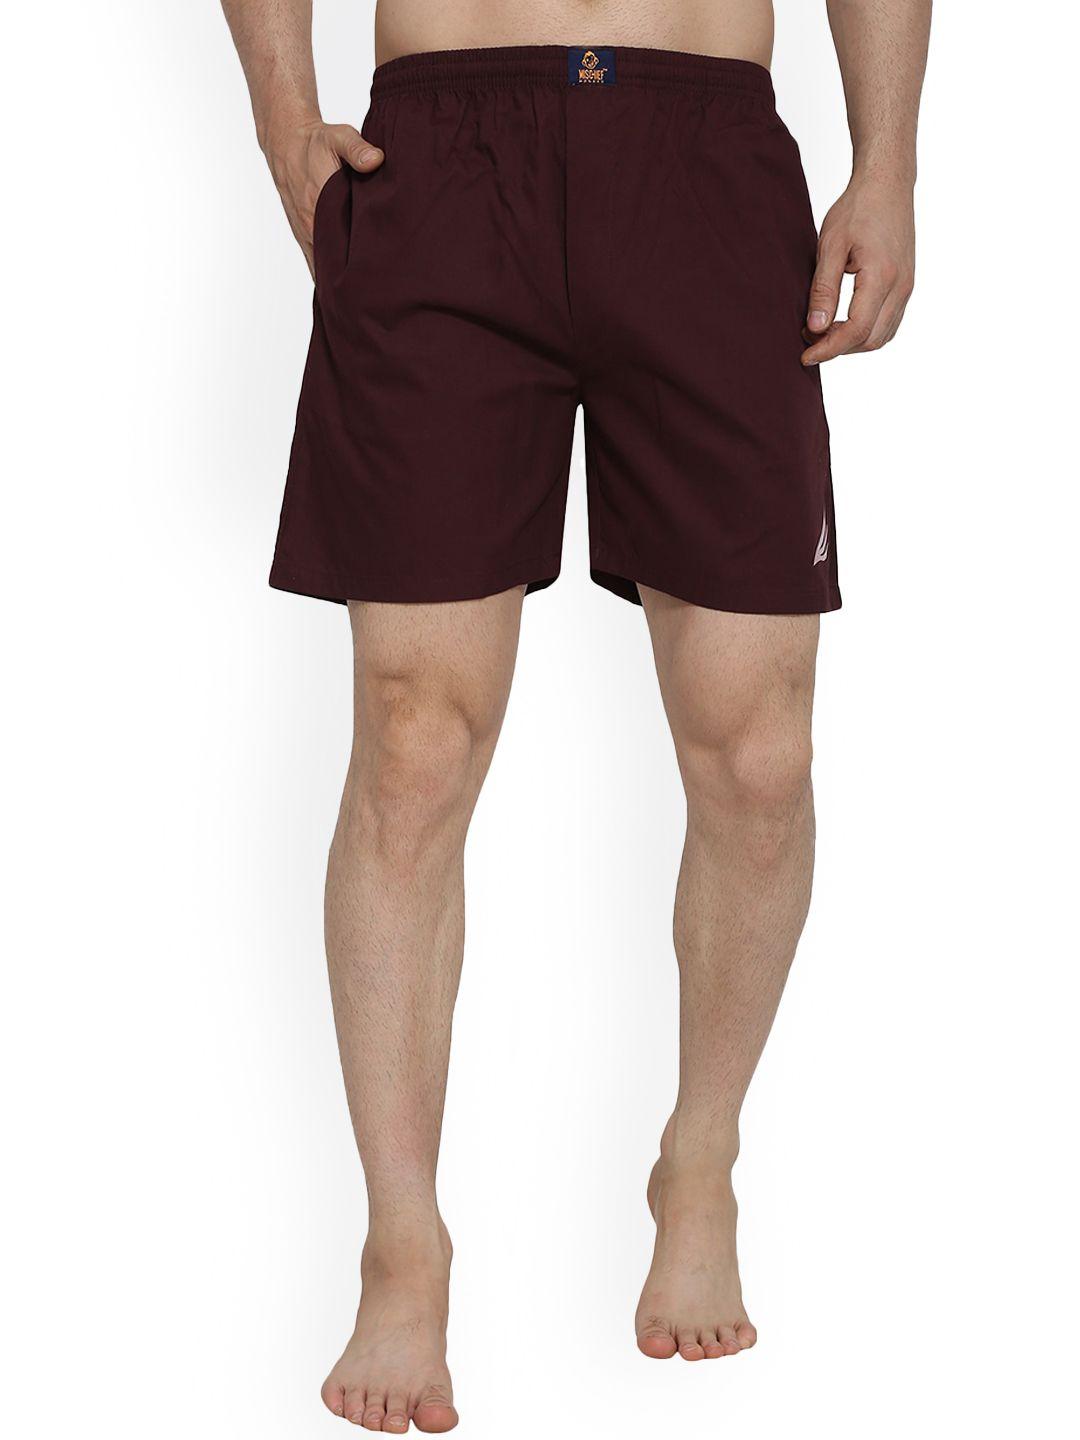 mischief monkey mid-rise pure cotton boxers mm-bxr-maroon-m